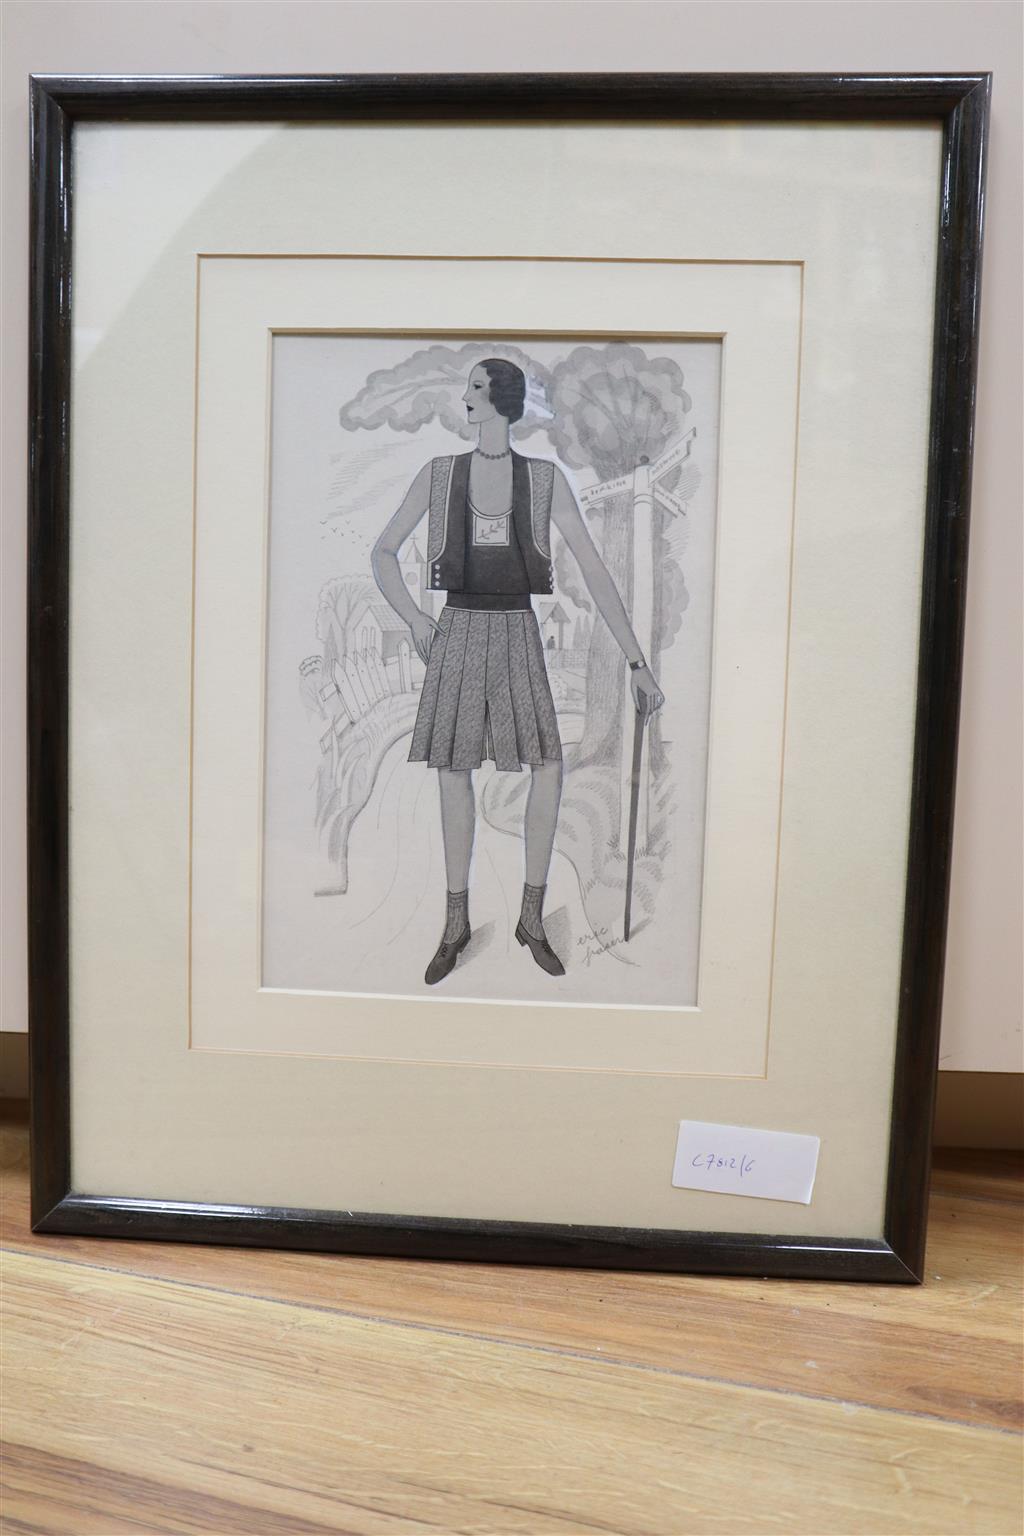 Eric Fraser (1902-1983), monochrome watercolour with pencil, Illustration for Vanity Fair, signed, 23 x 15.5cm